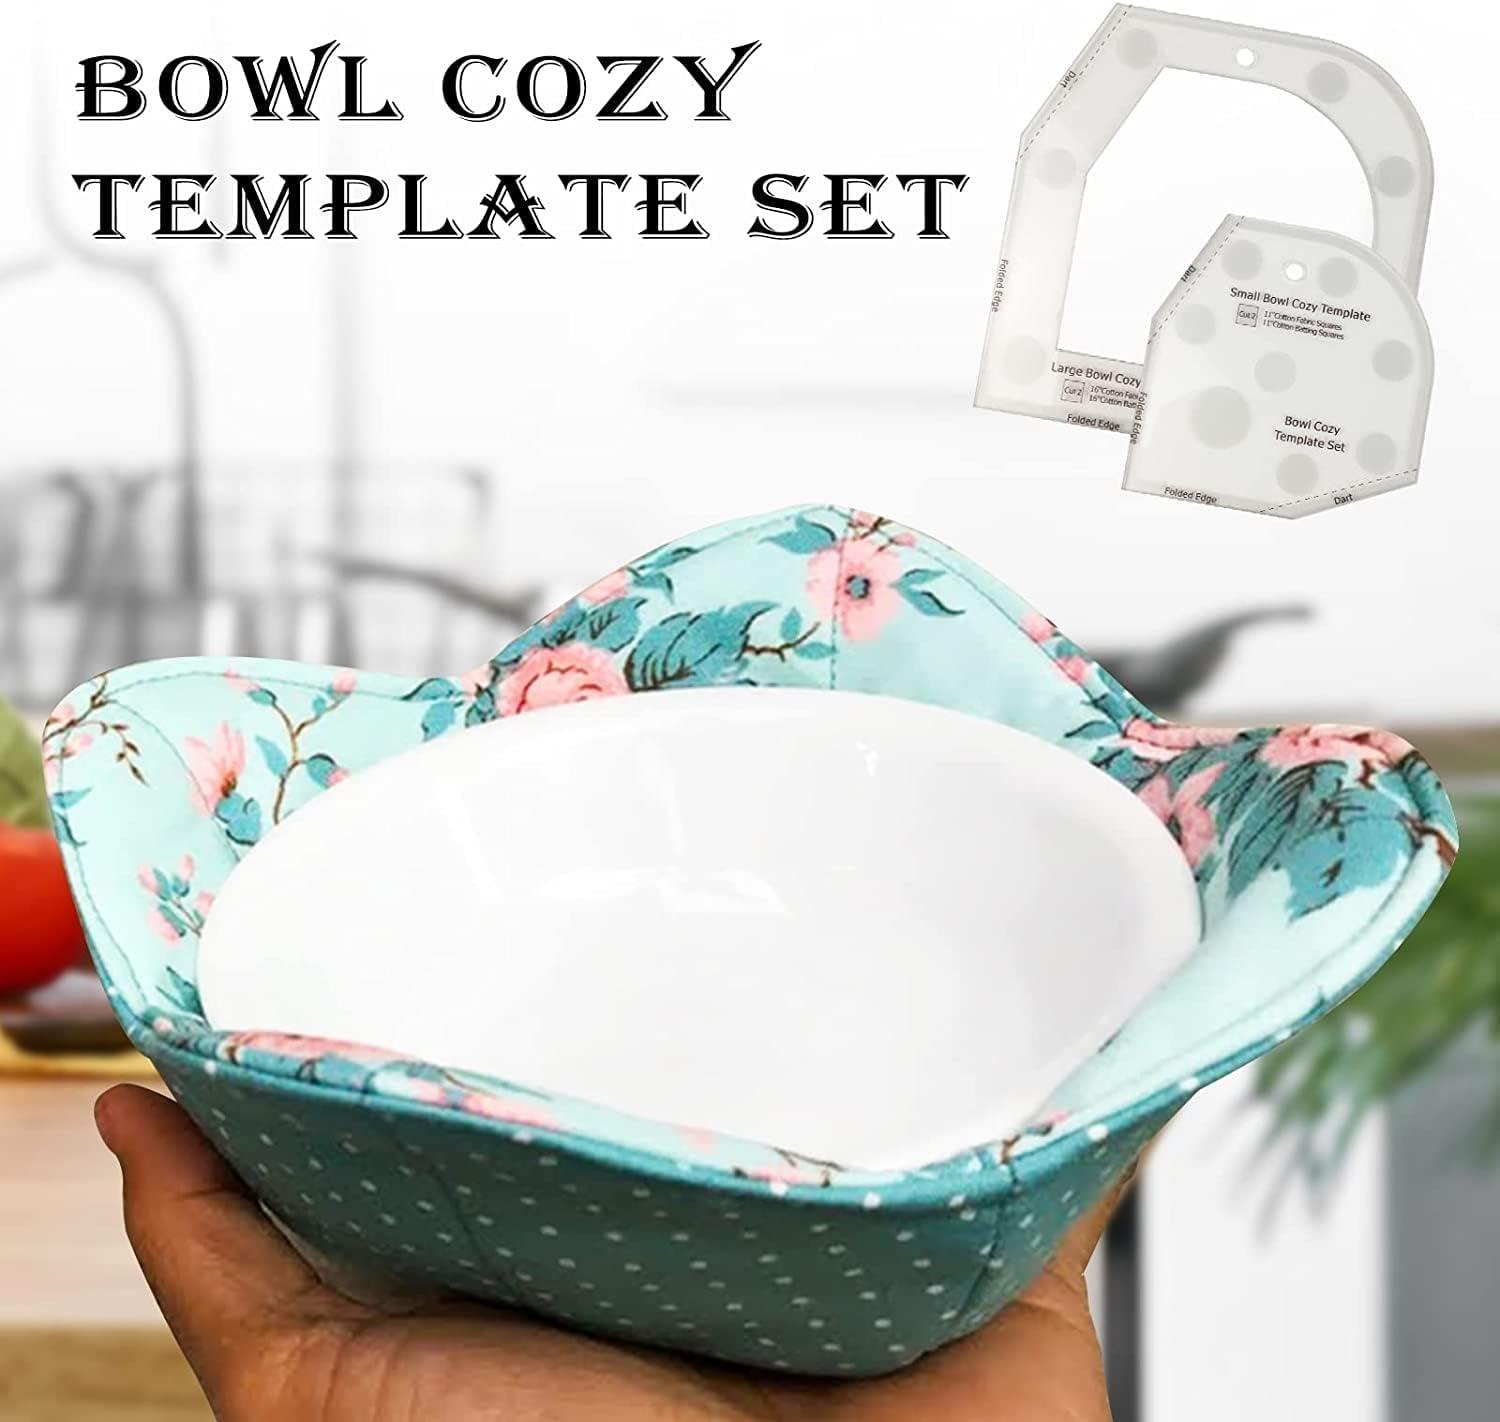 Bowl Cozy Template Cutting Ruler Kit, Acrylic Transparent Quilting